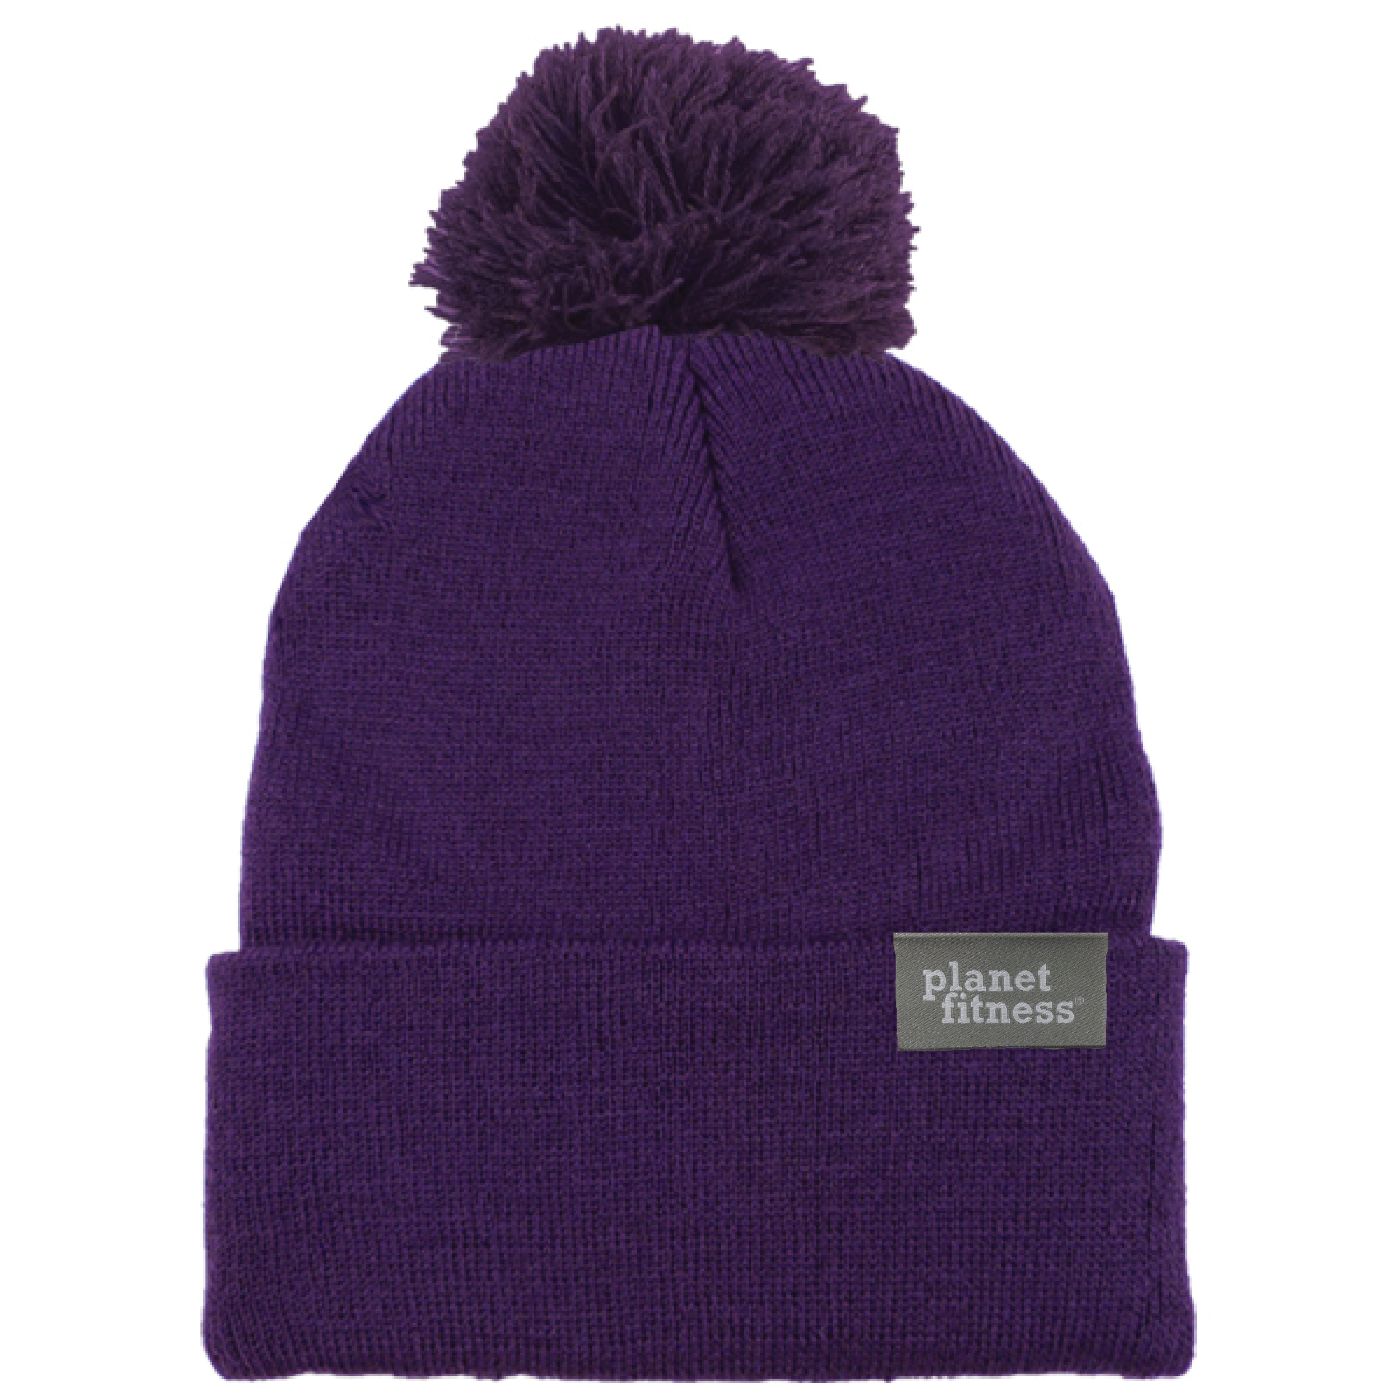 Long Knit Beanie With Pom  Planet Fitness Store Canada